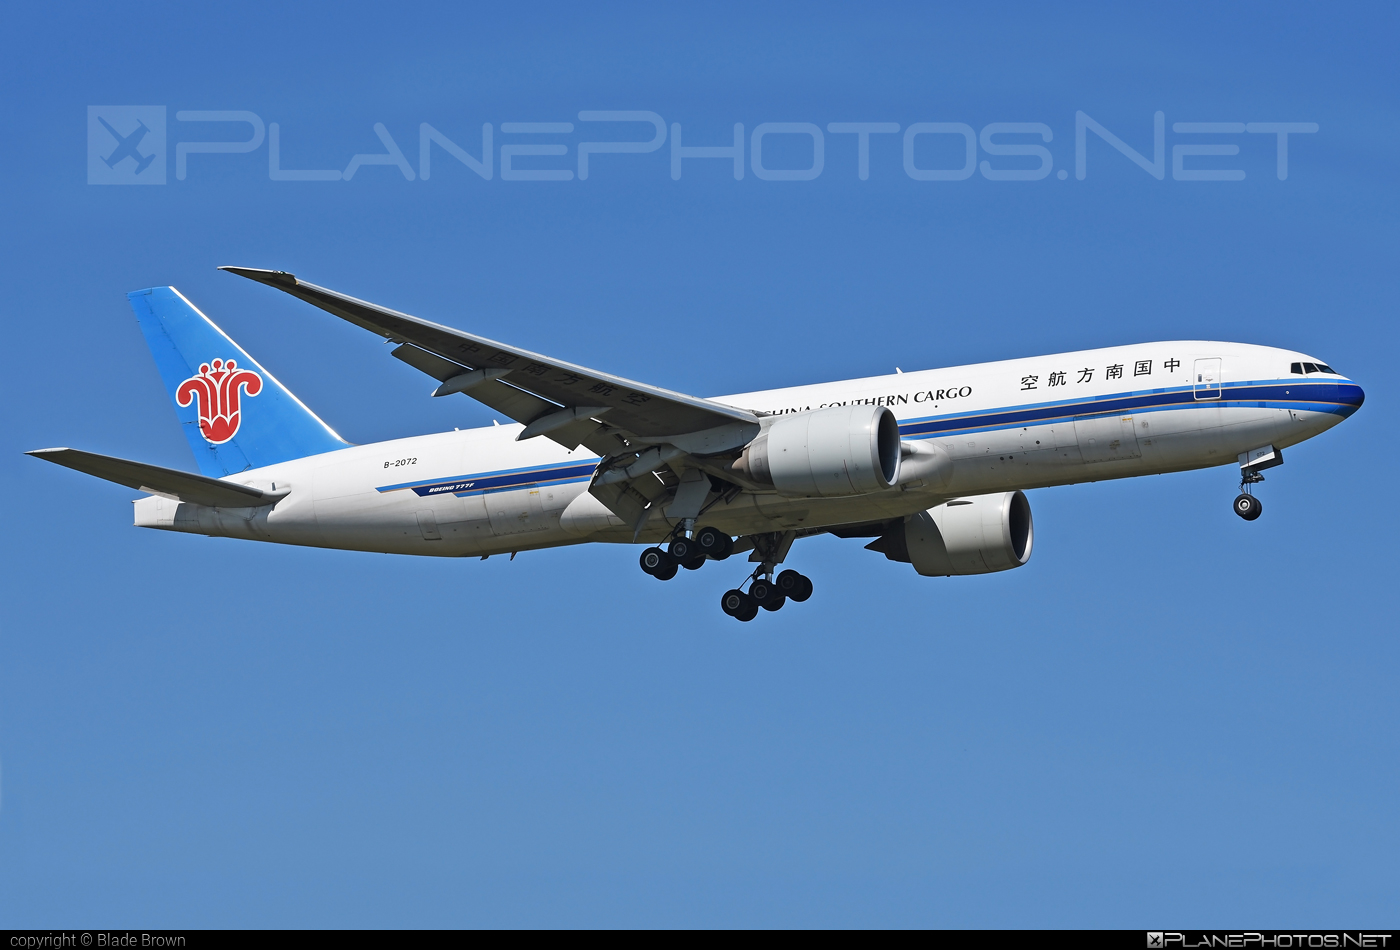 Boeing 777F - B-2072 operated by China Southern Cargo #b777 #b777f #b777freighter #boeing #boeing777 #tripleseven